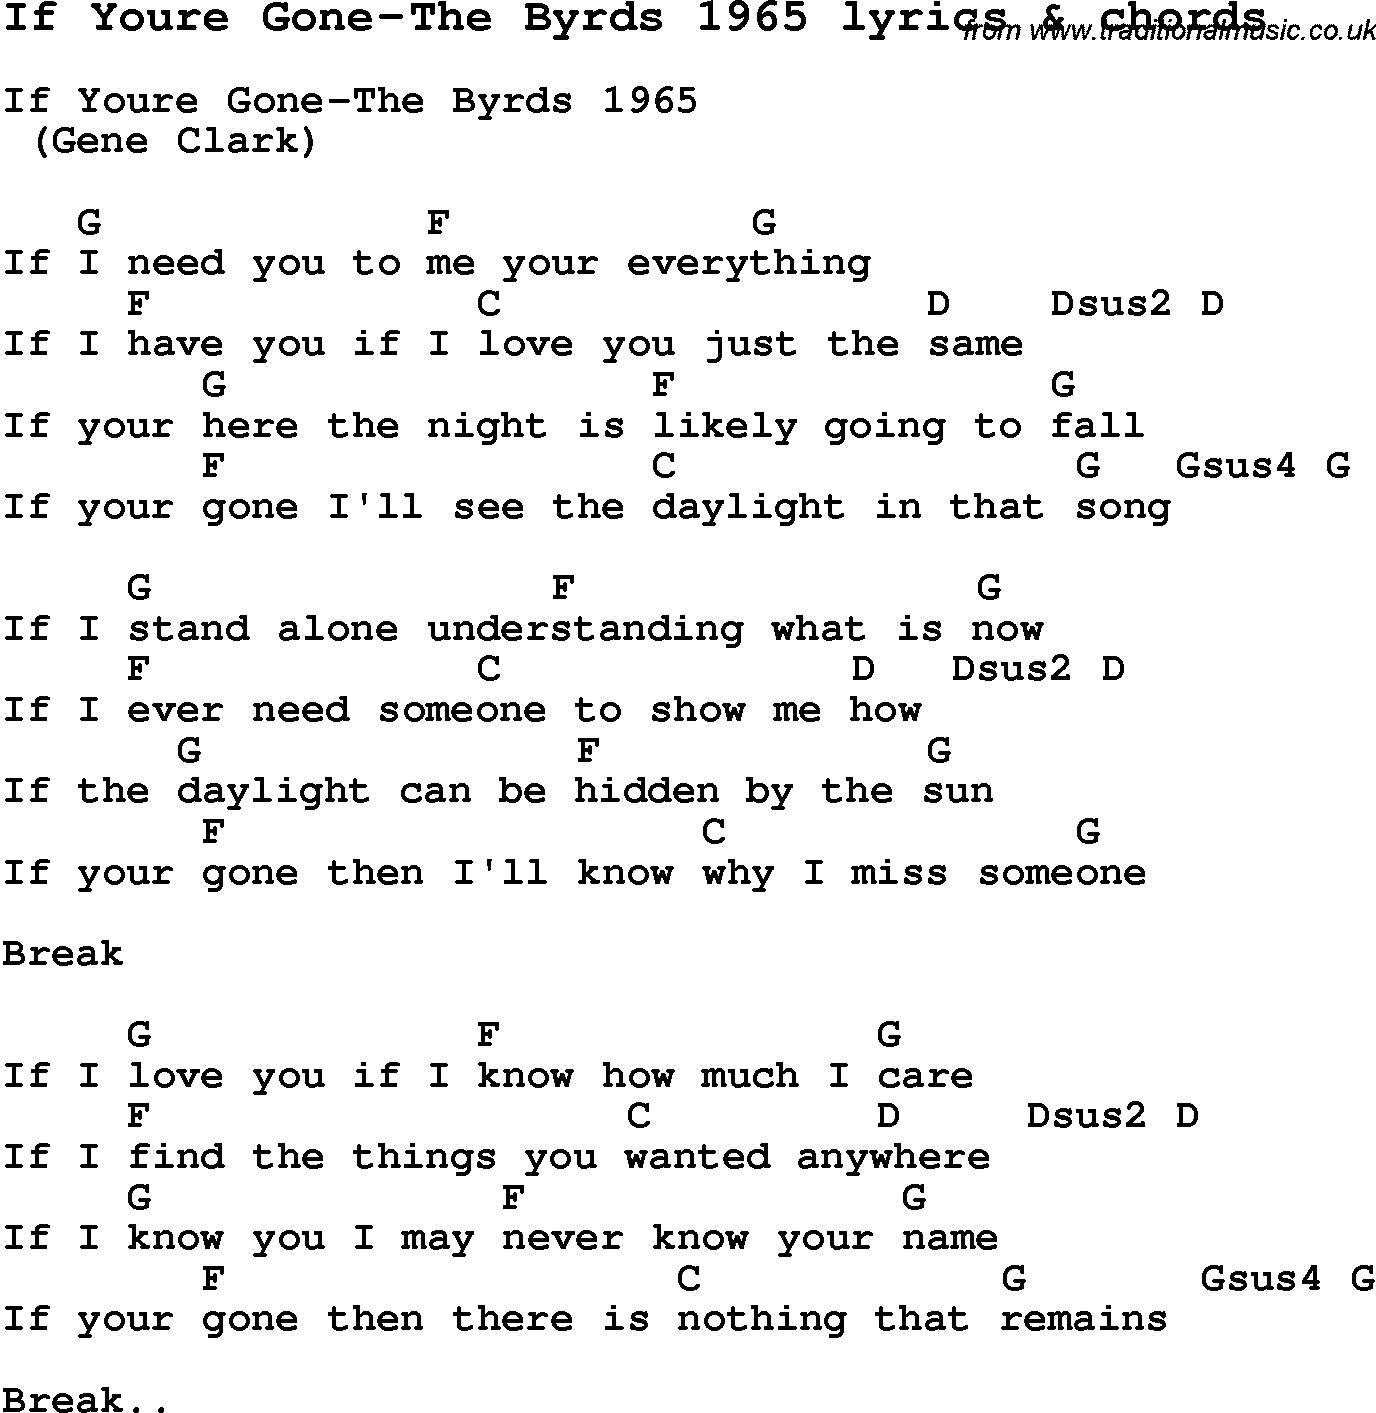 Love Song Lyrics for: If Youre Gone-The Byrds 1965 with chords for Ukulele, Guitar Banjo etc.